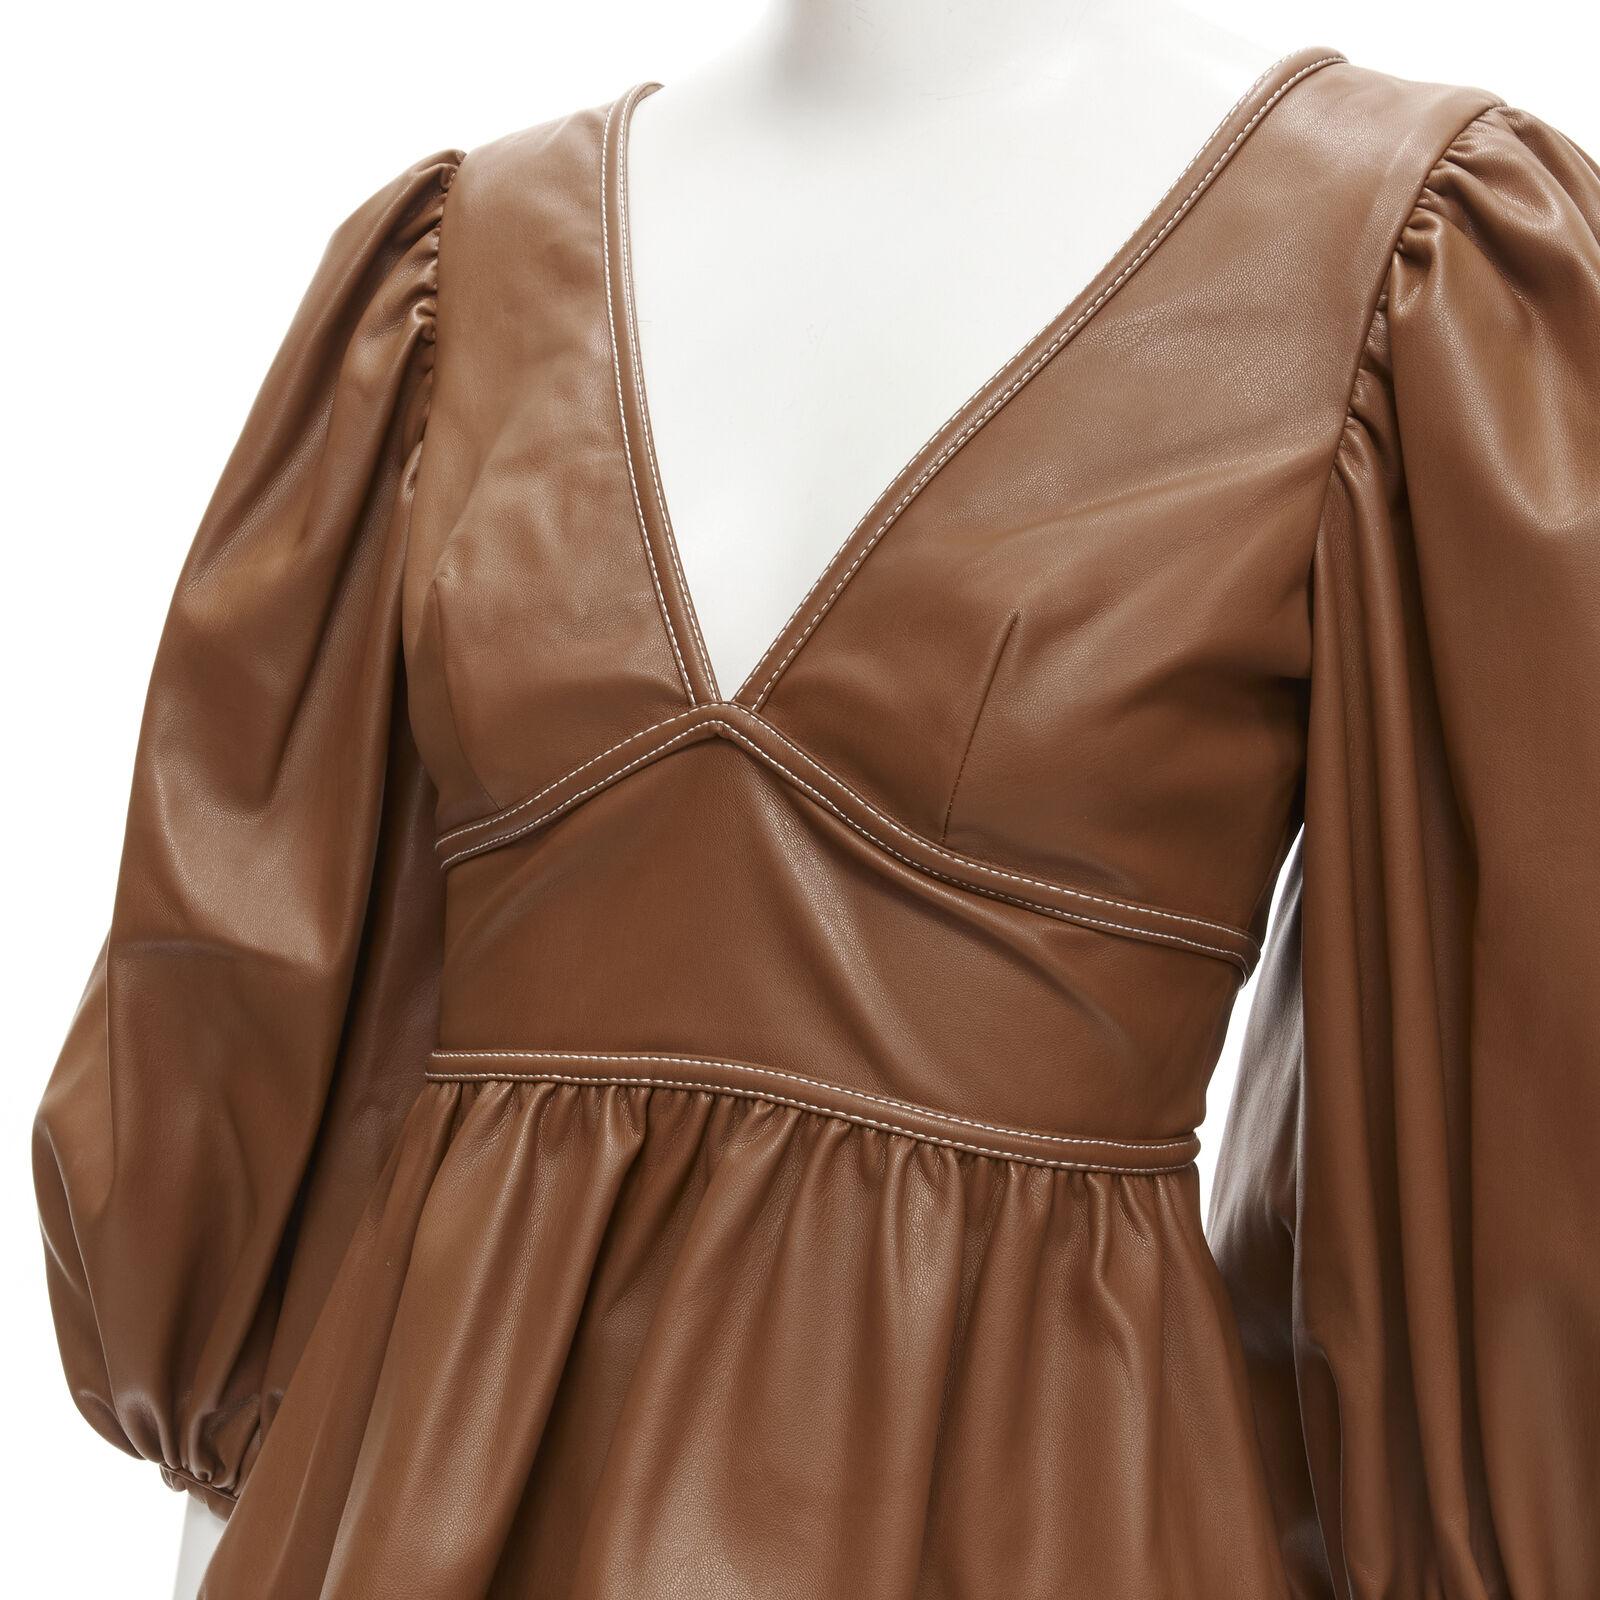 STAUD Luna tan brown vegan faux leather plunge neck puff sleeve top US0 XS
Reference: AAWC/A00108
Brand: Staud
Model: Luna
Material: Faux Leather
Color: Brown
Pattern: Solid
Lining: Unlined
Extra Details: Button back. Self tie at nape.
Made in: